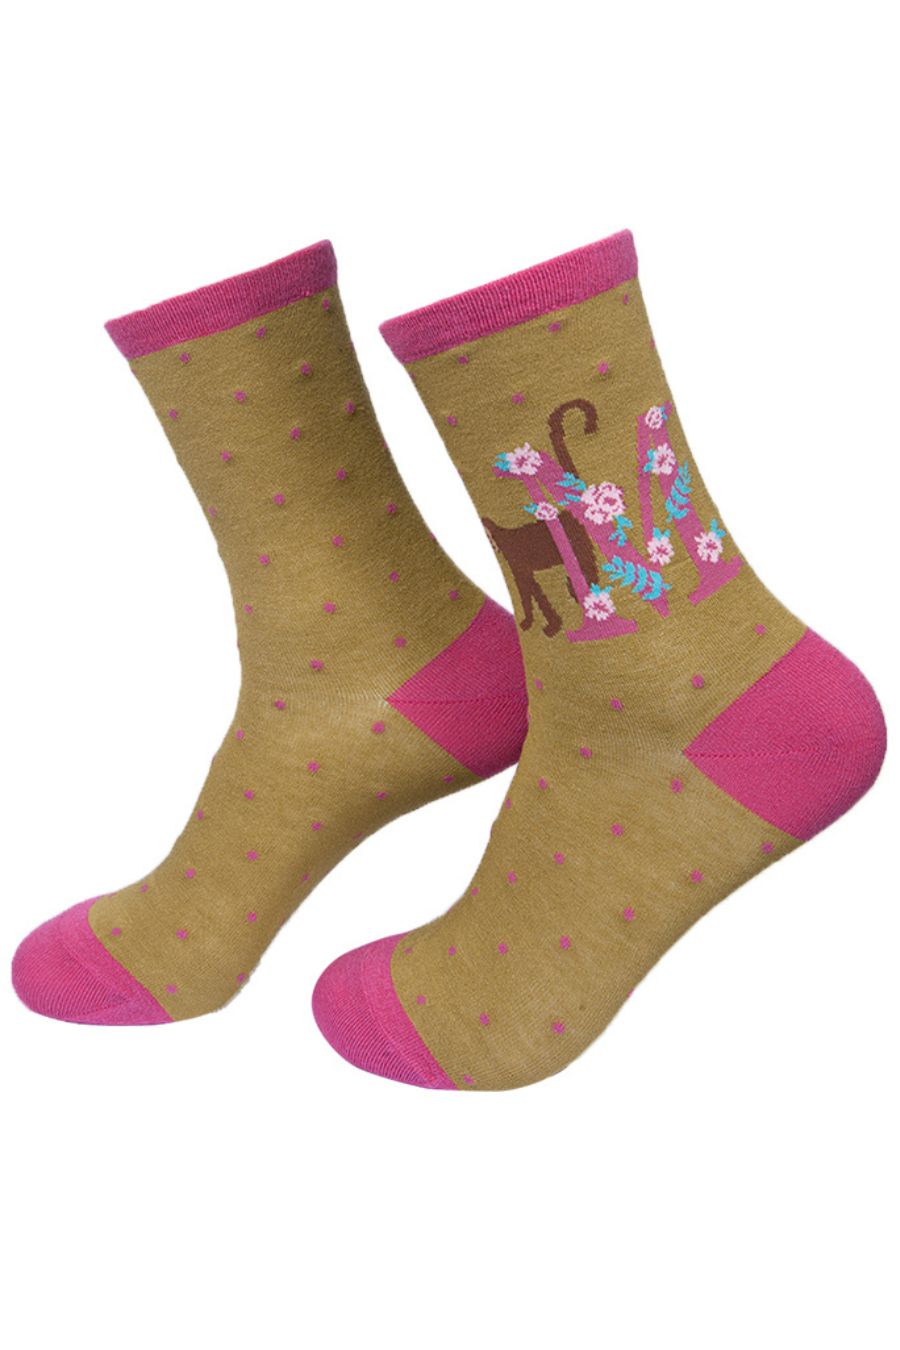 mustard yellow, pink ankle socks with a letter M and a monkey